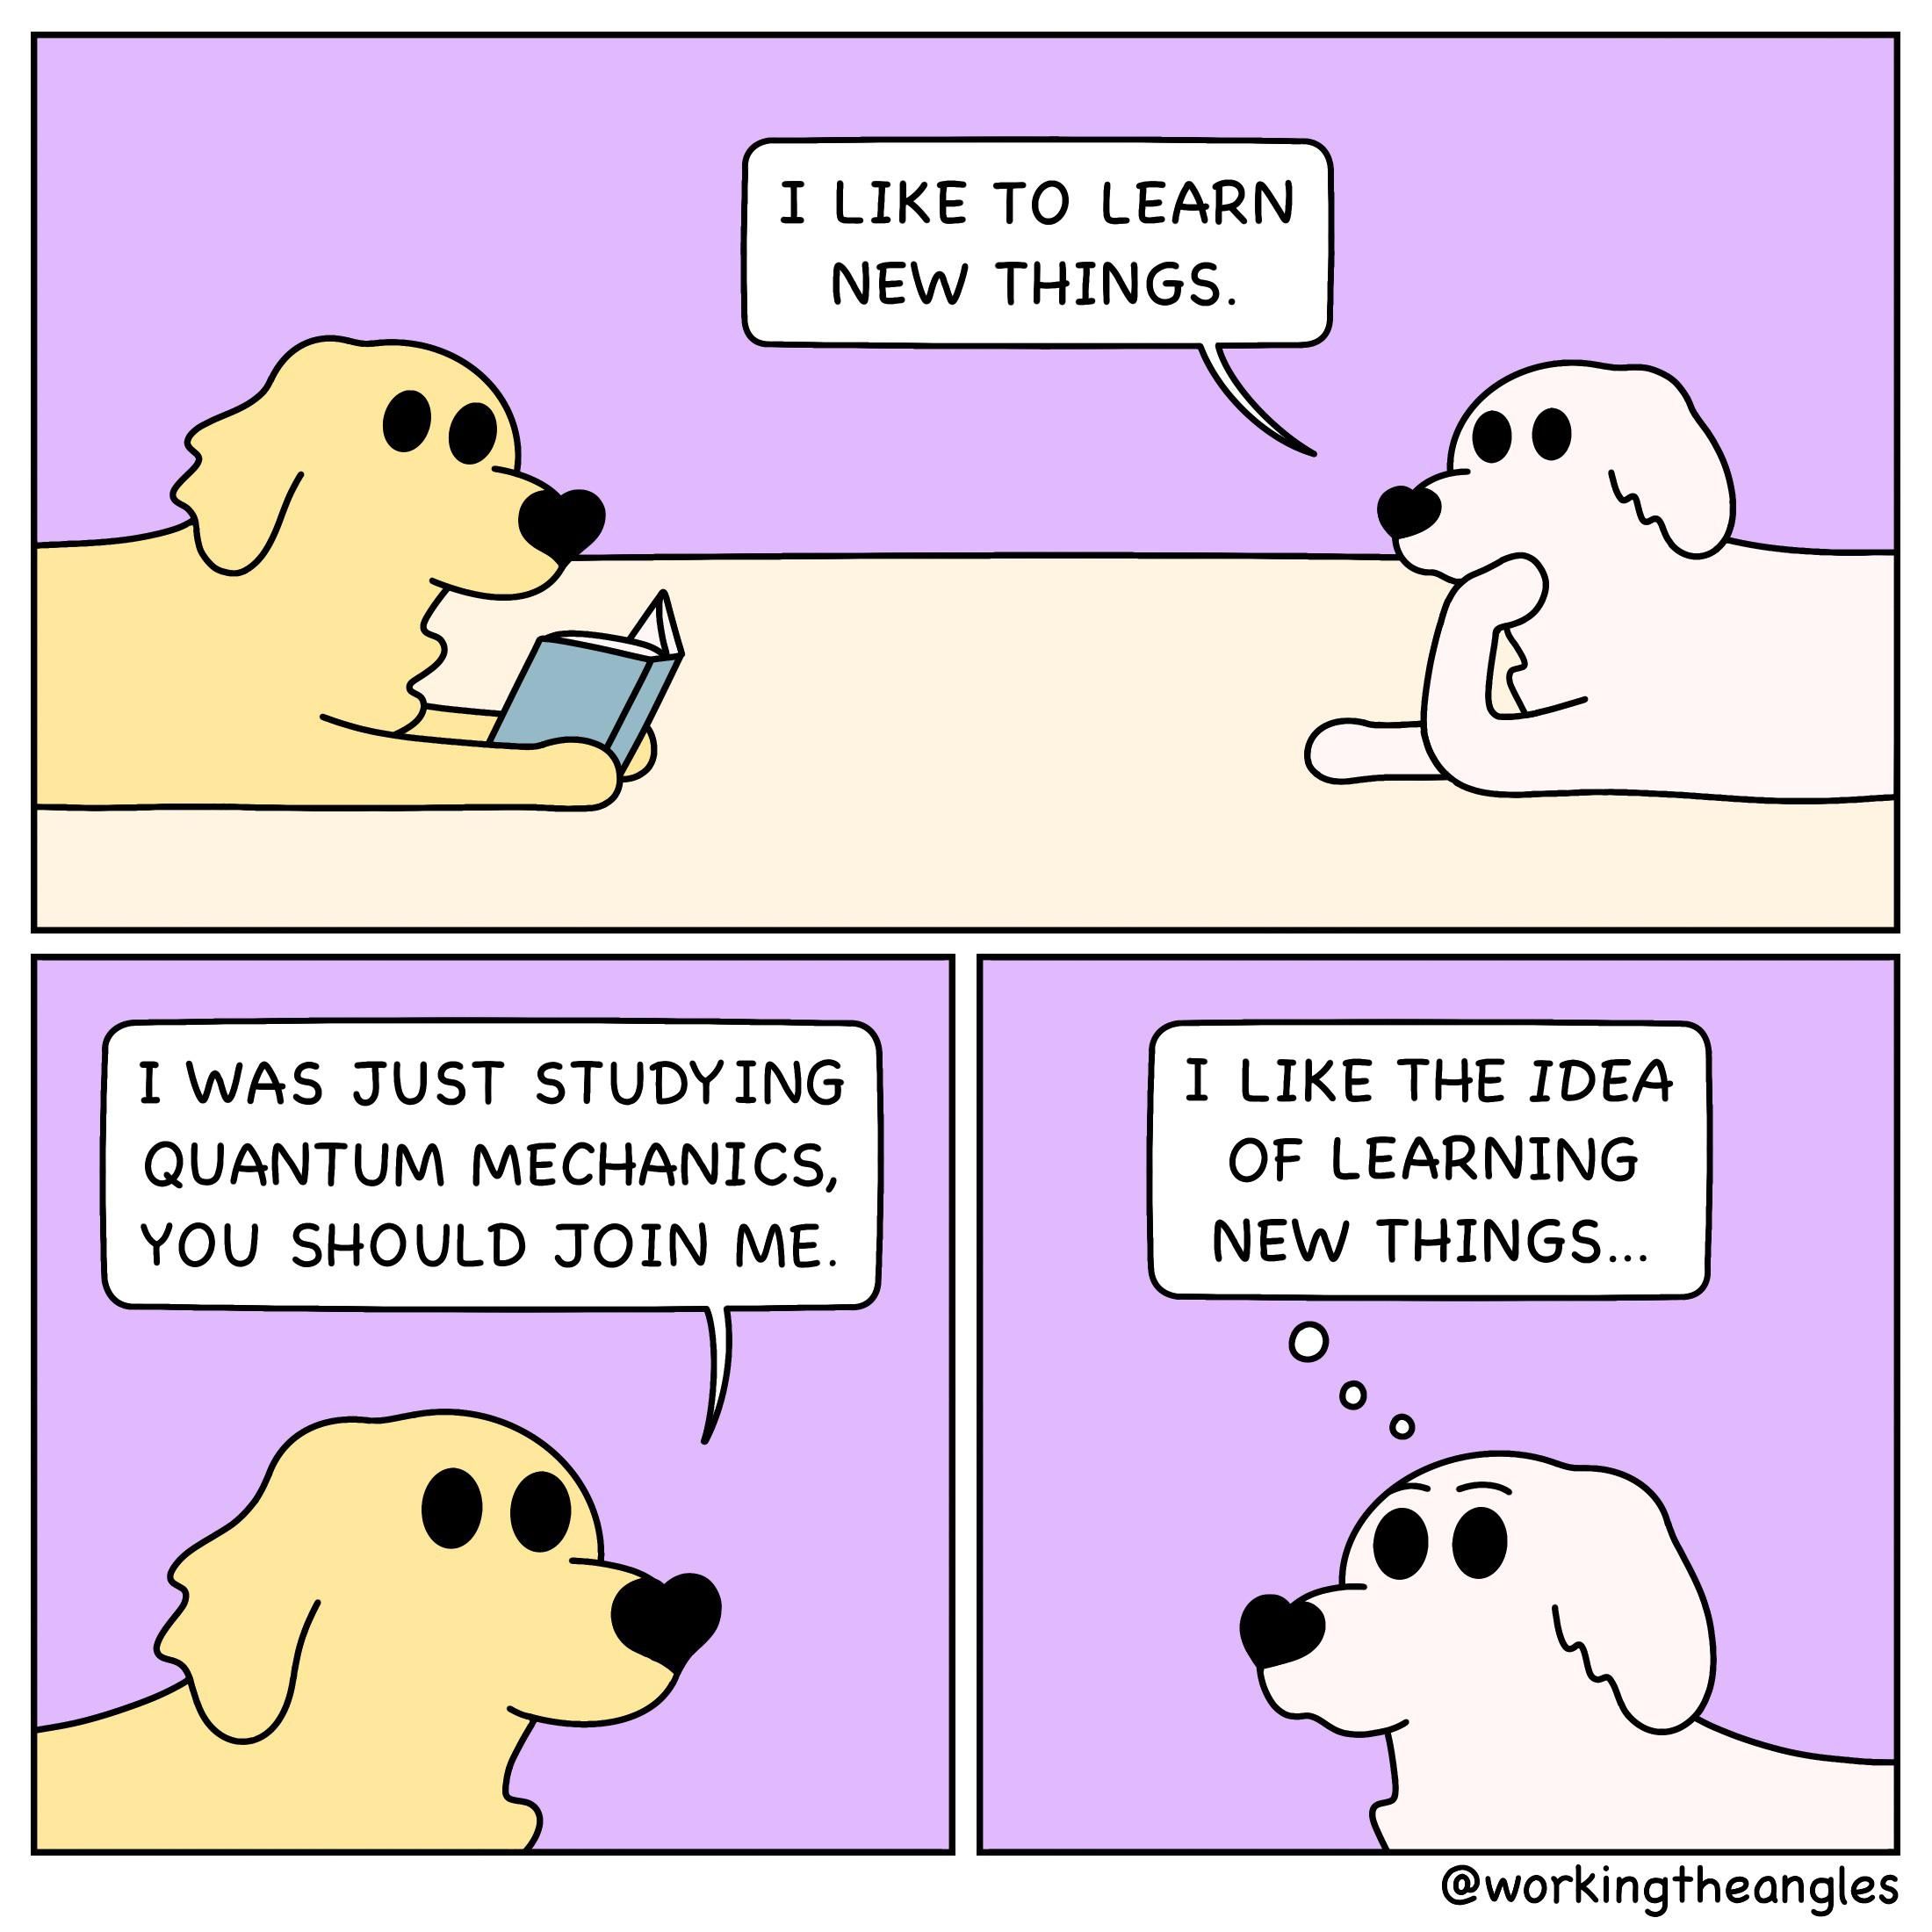 Much to learn!